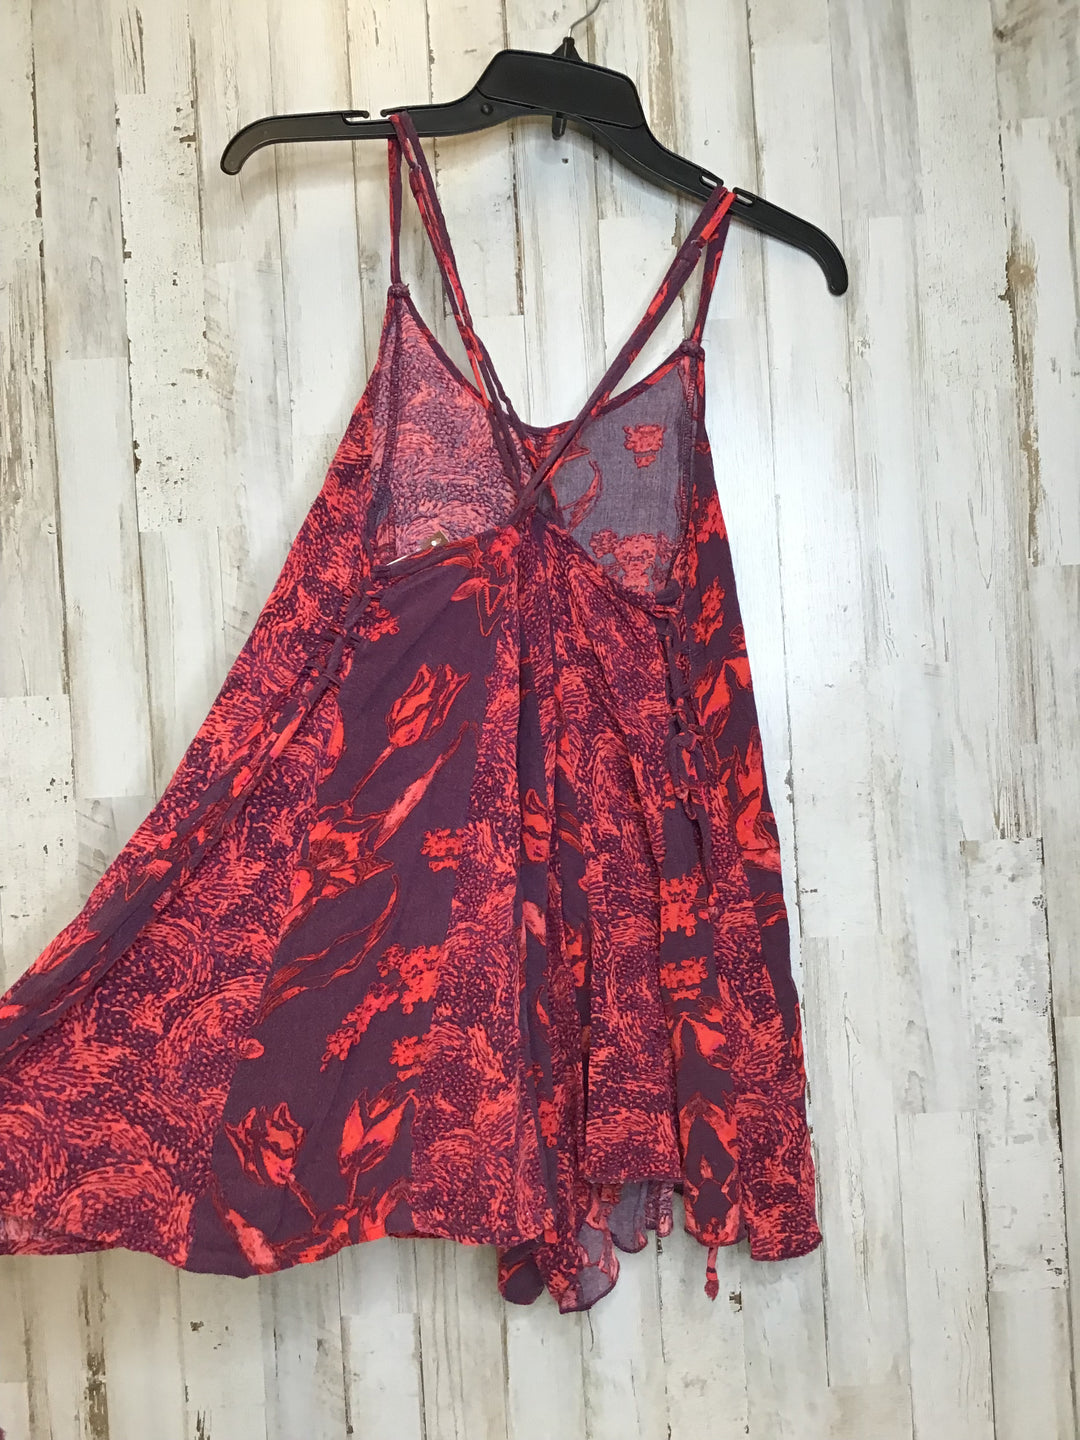  Photo #1 - BRAND: FREE PEOPLE <BR>STYLE: ROMPER SHORT SLEEVELESS <BR>COLOR: RED <BR>SIZE: XS <BR>SKU: 309-309163-1679<BR><BR>*ALL ITEMS ARE USED AND WILL HAVE NORMAL WEAR. EVEN NWT ITEMS HAVE BEEN IN SOMEONE’S HOME. WE DO THOROUGHLY CHECK ITEMS FOR MARKS, WEAR, AND EVEN SMELLS. WE ALSO DO OUR BEST TO CLEARLY PHOTOGRAPH ALL ITEMS INCLUDING ANY IMPERFECTIONS IN THE PHOTOS. ITEMS ARE ALSO DOUBLE CHECKED BEFORE SHIPPING. FOR THESE REASONS, ITEMS BOUGHT ONLINE DO NOT QUALIFY FOR A REFUND.